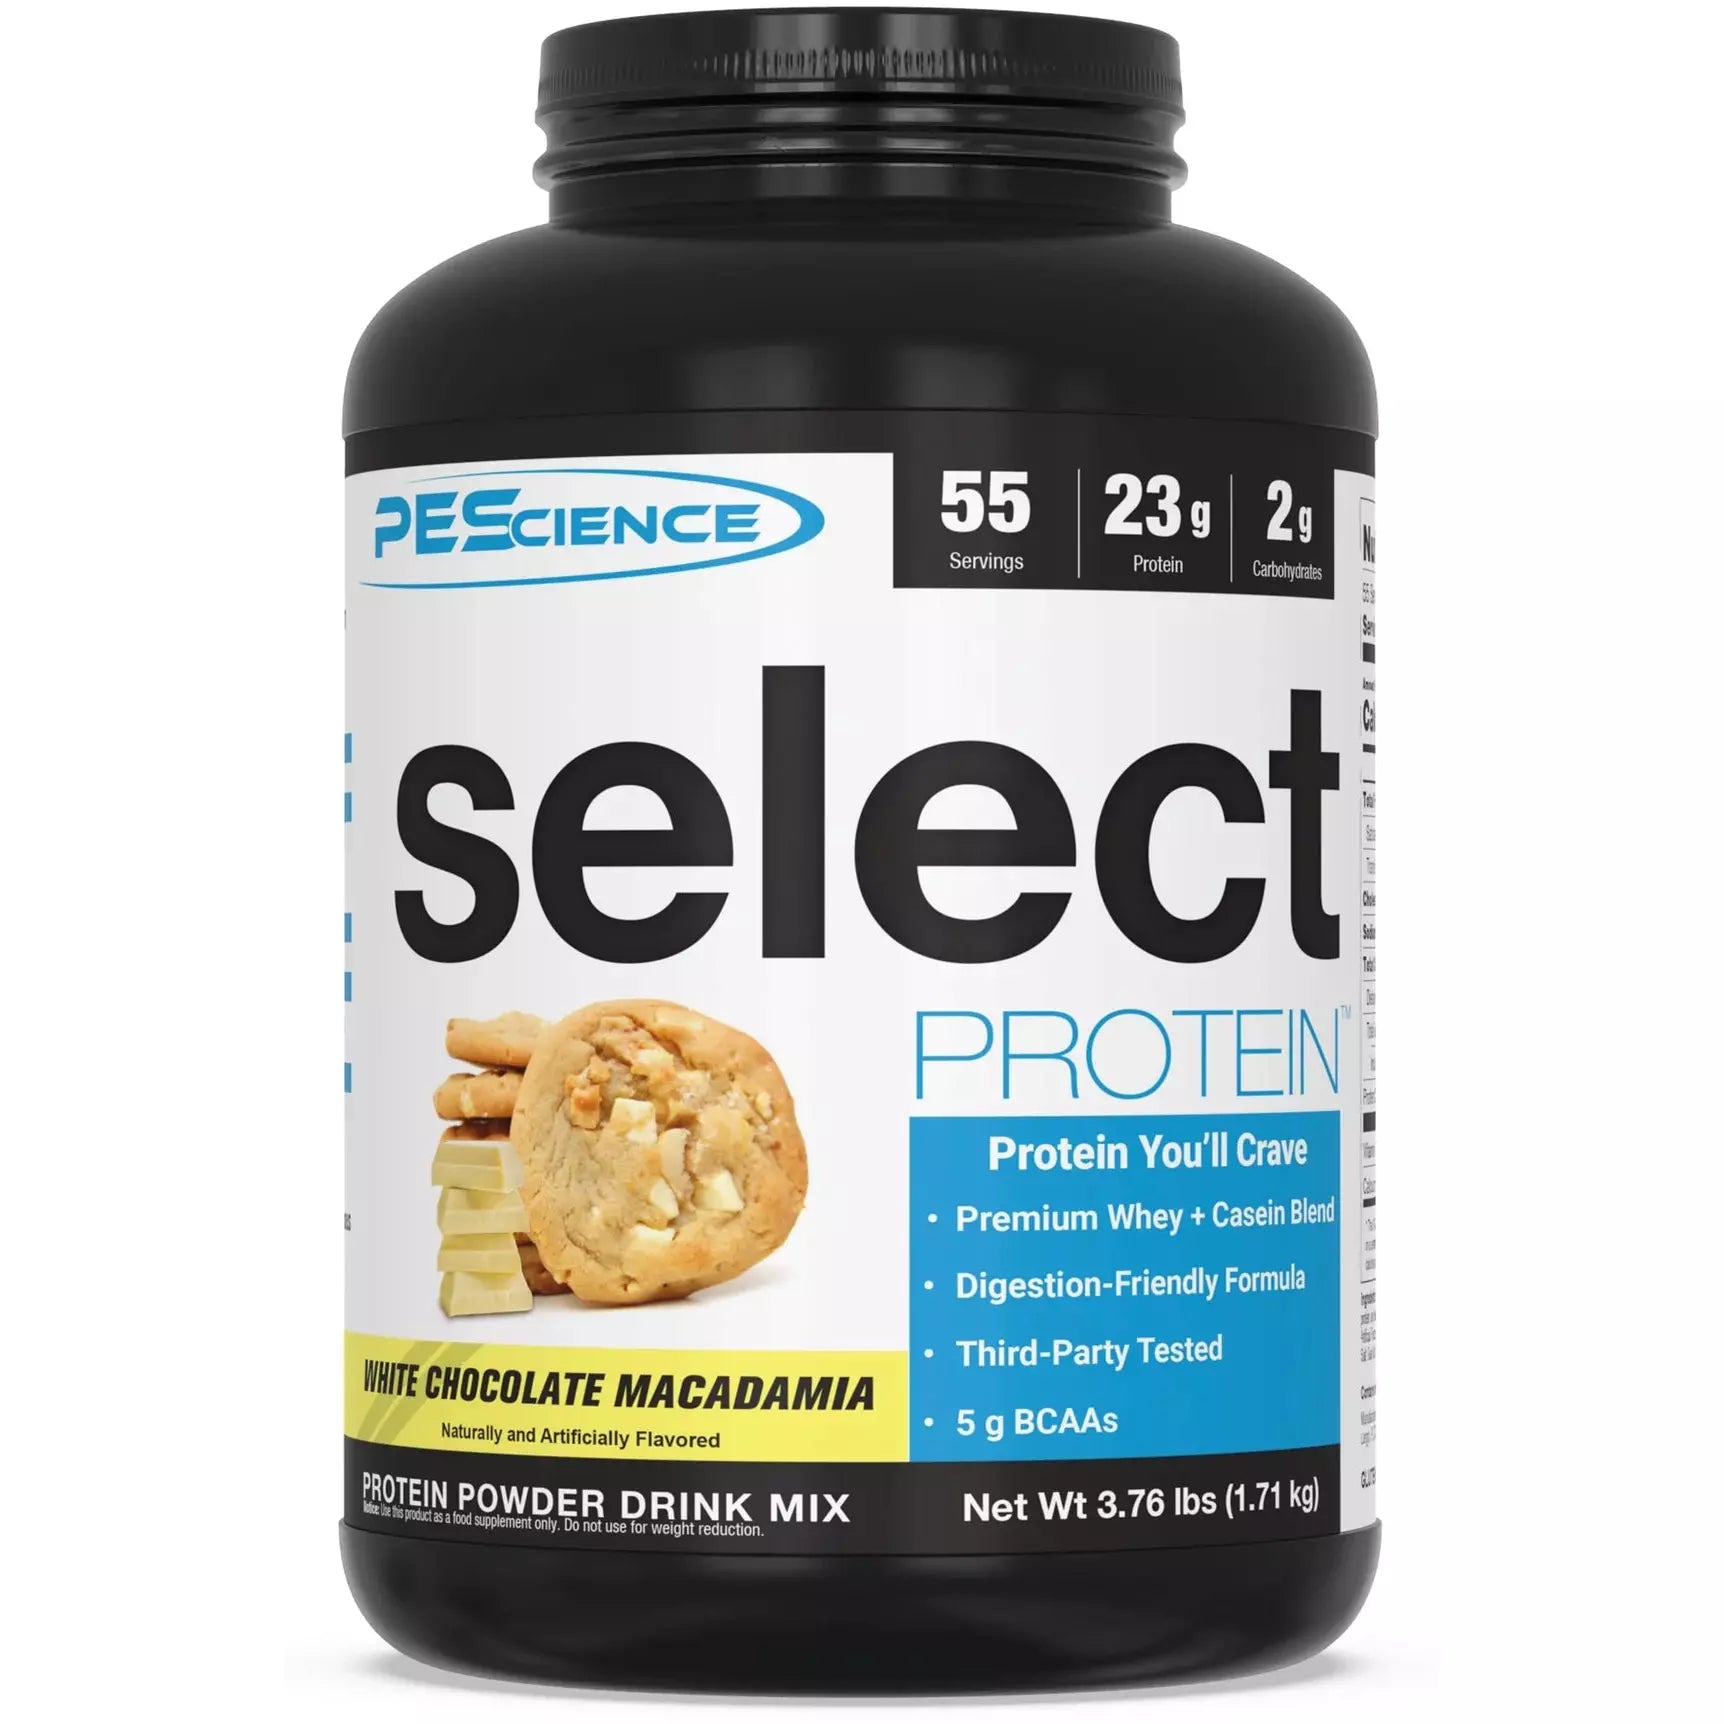 PEScience Select Protein (55 servings) Whey Protein Blend NEW! White Chocolate Macadamia PEScience